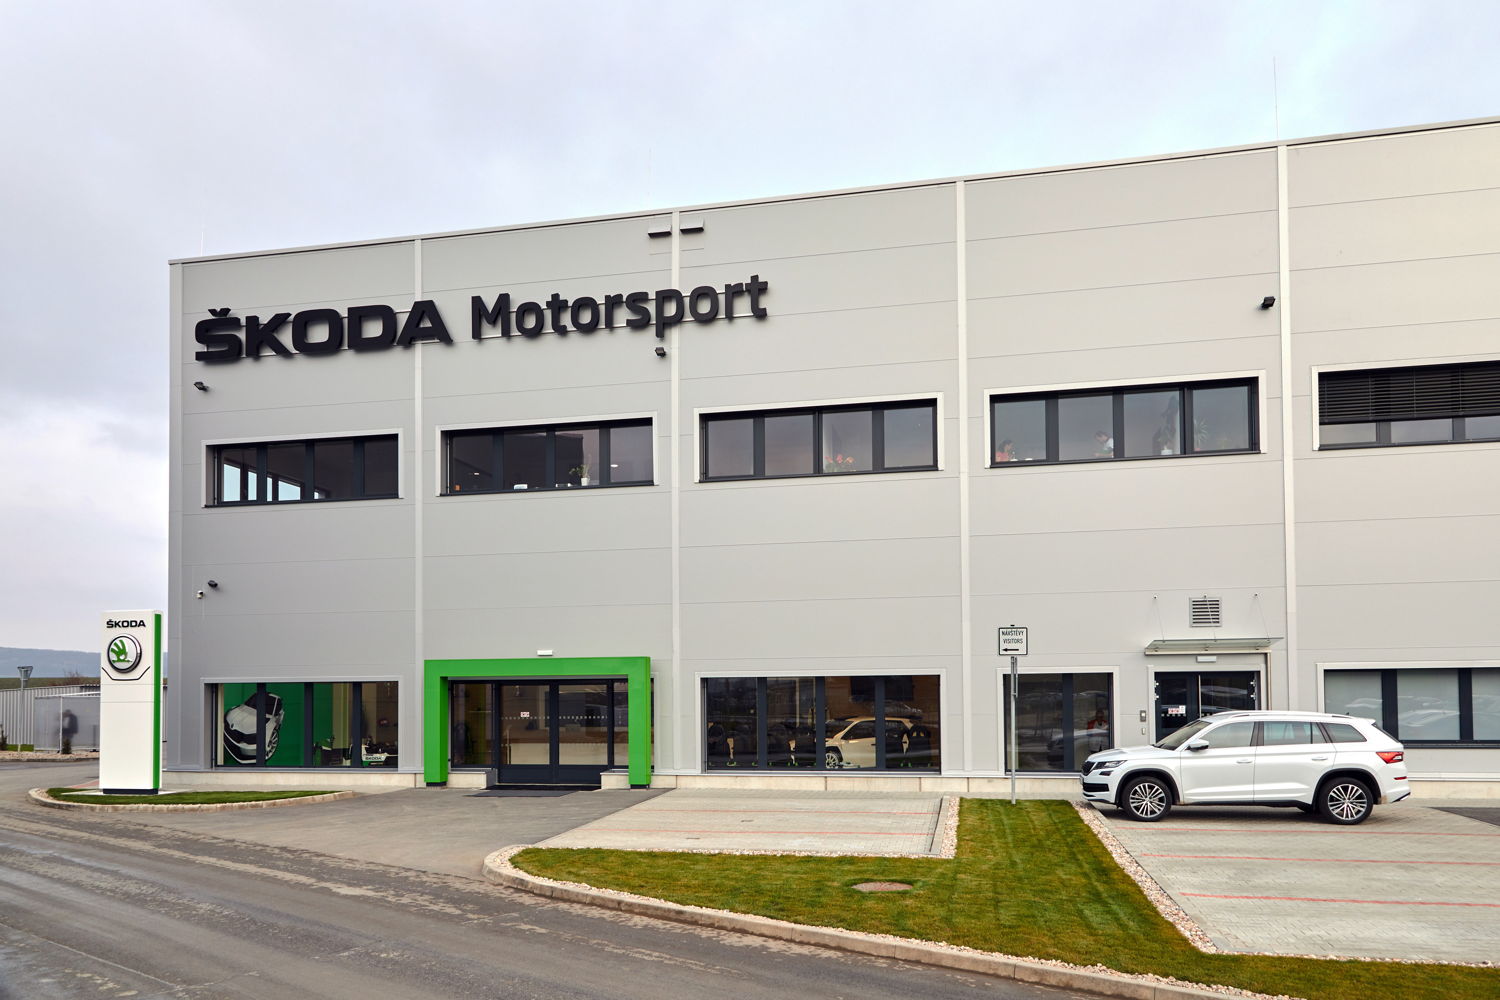 The new facilities host all departments of ŠKODA Motorsport under one roof.